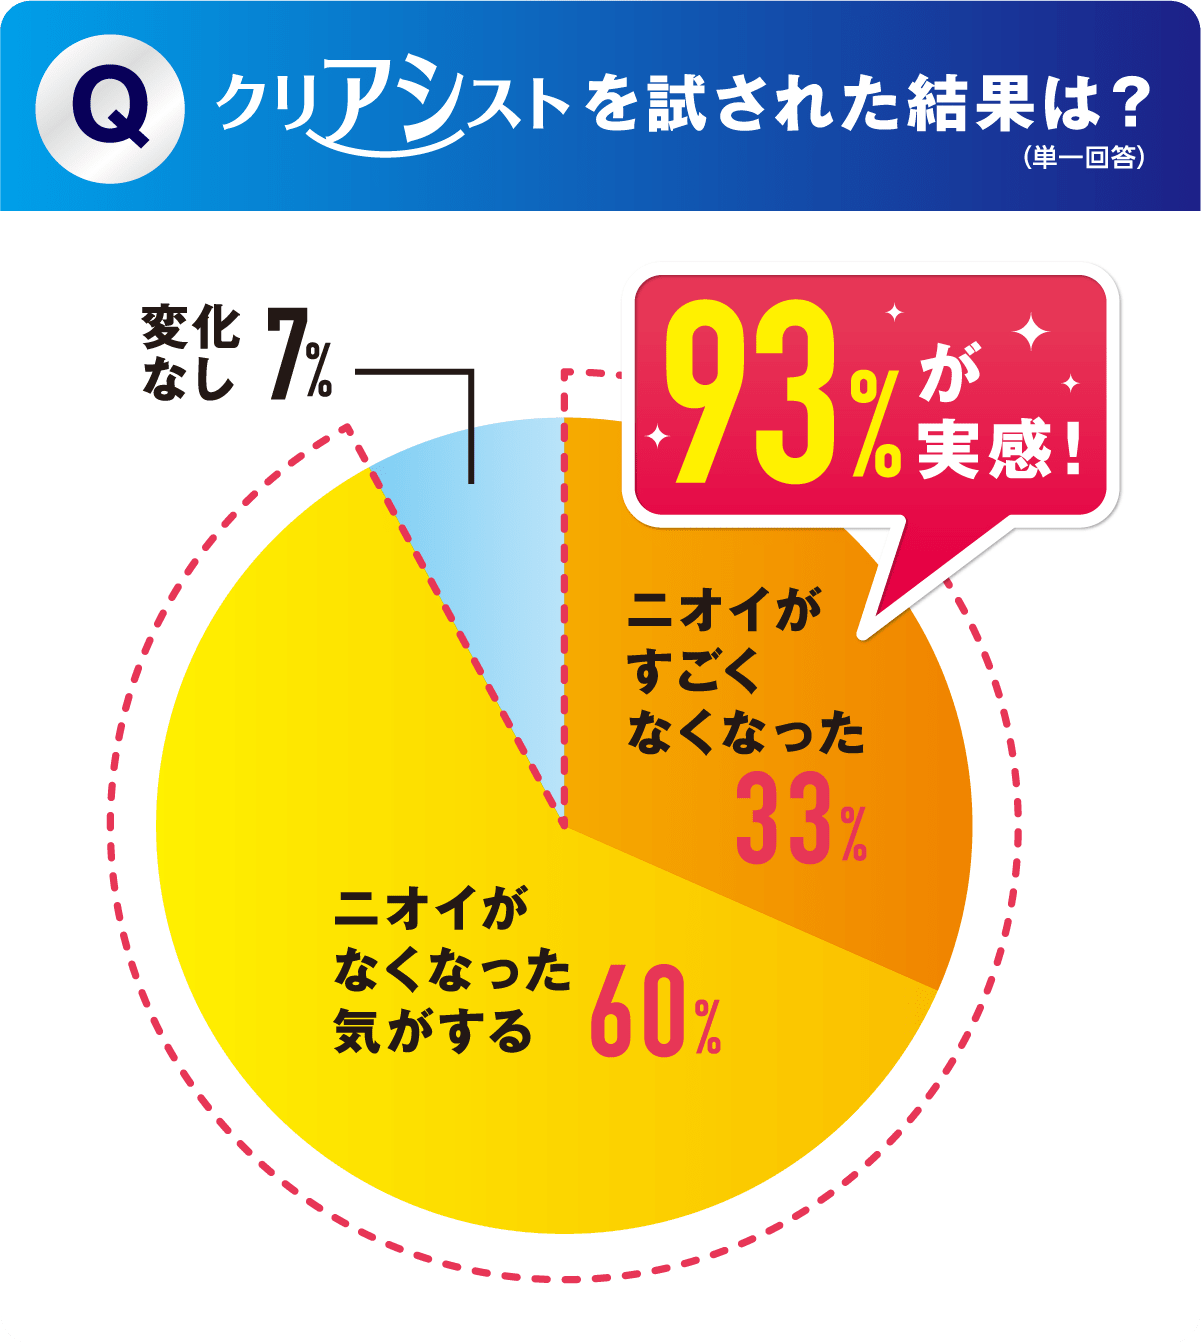 Q. What is the result of trying CriAssist? (Single answer) The odor has disappeared 33% I feel that the odor has disappeared 60% No change 7% 93% actually feel it!